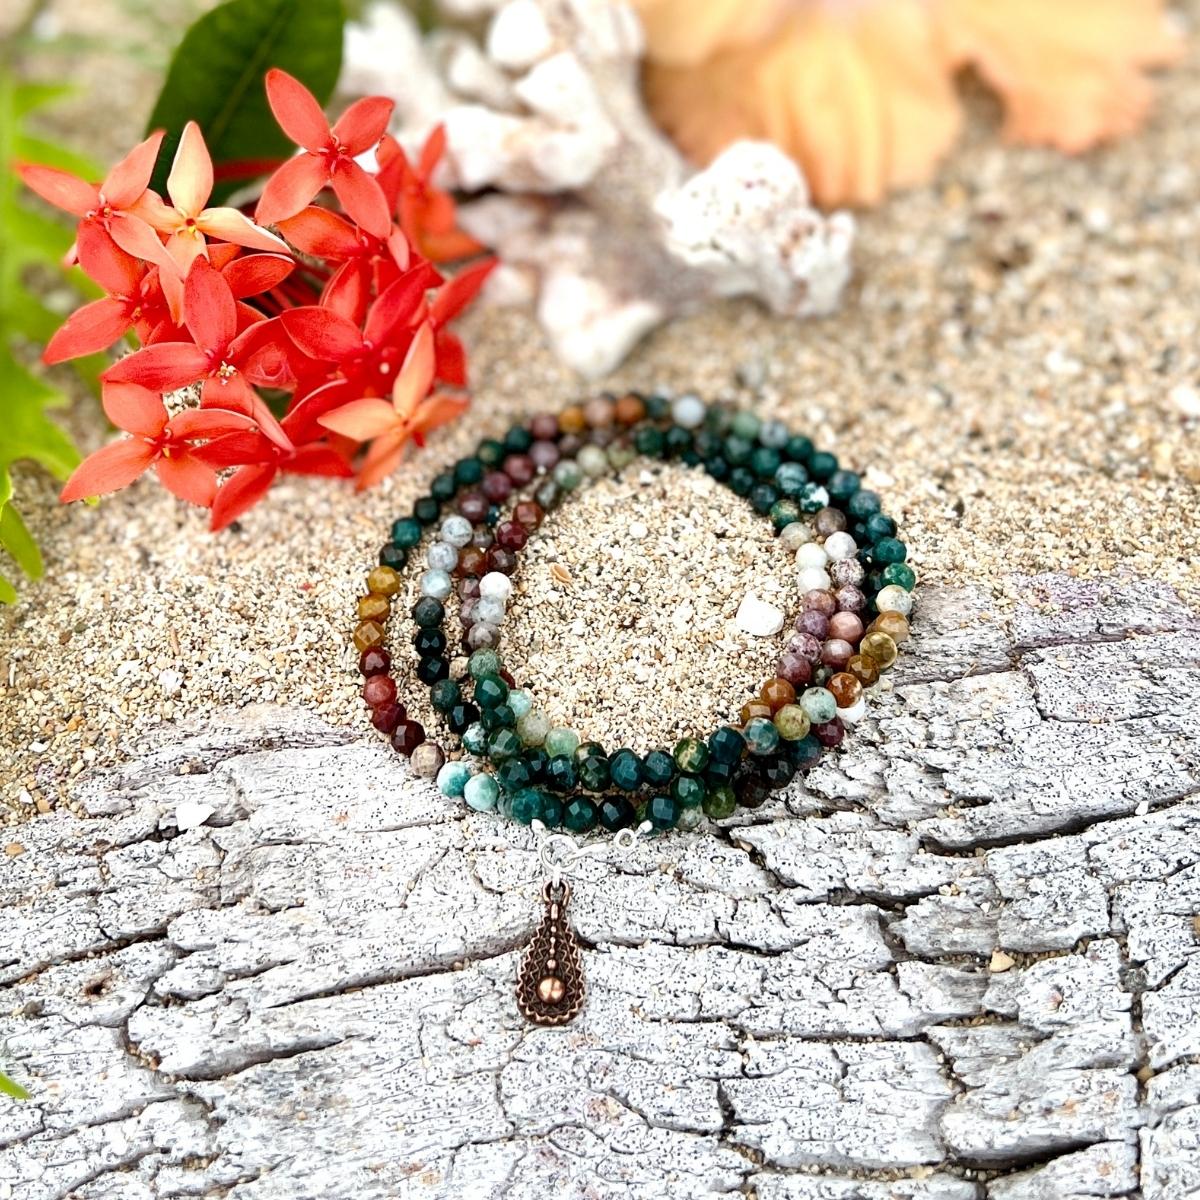 Bloodstone Wrap Bracelet for Courage.  Bloodstone is a stone of courage and wisdom, noble sacrifice, and altruistic character. Bloodstone represents a courageous spirit. Bloodstone boosts the innate healing power inside you by quieting a preoccupied mind and refocusing your energy on repair and renewal.